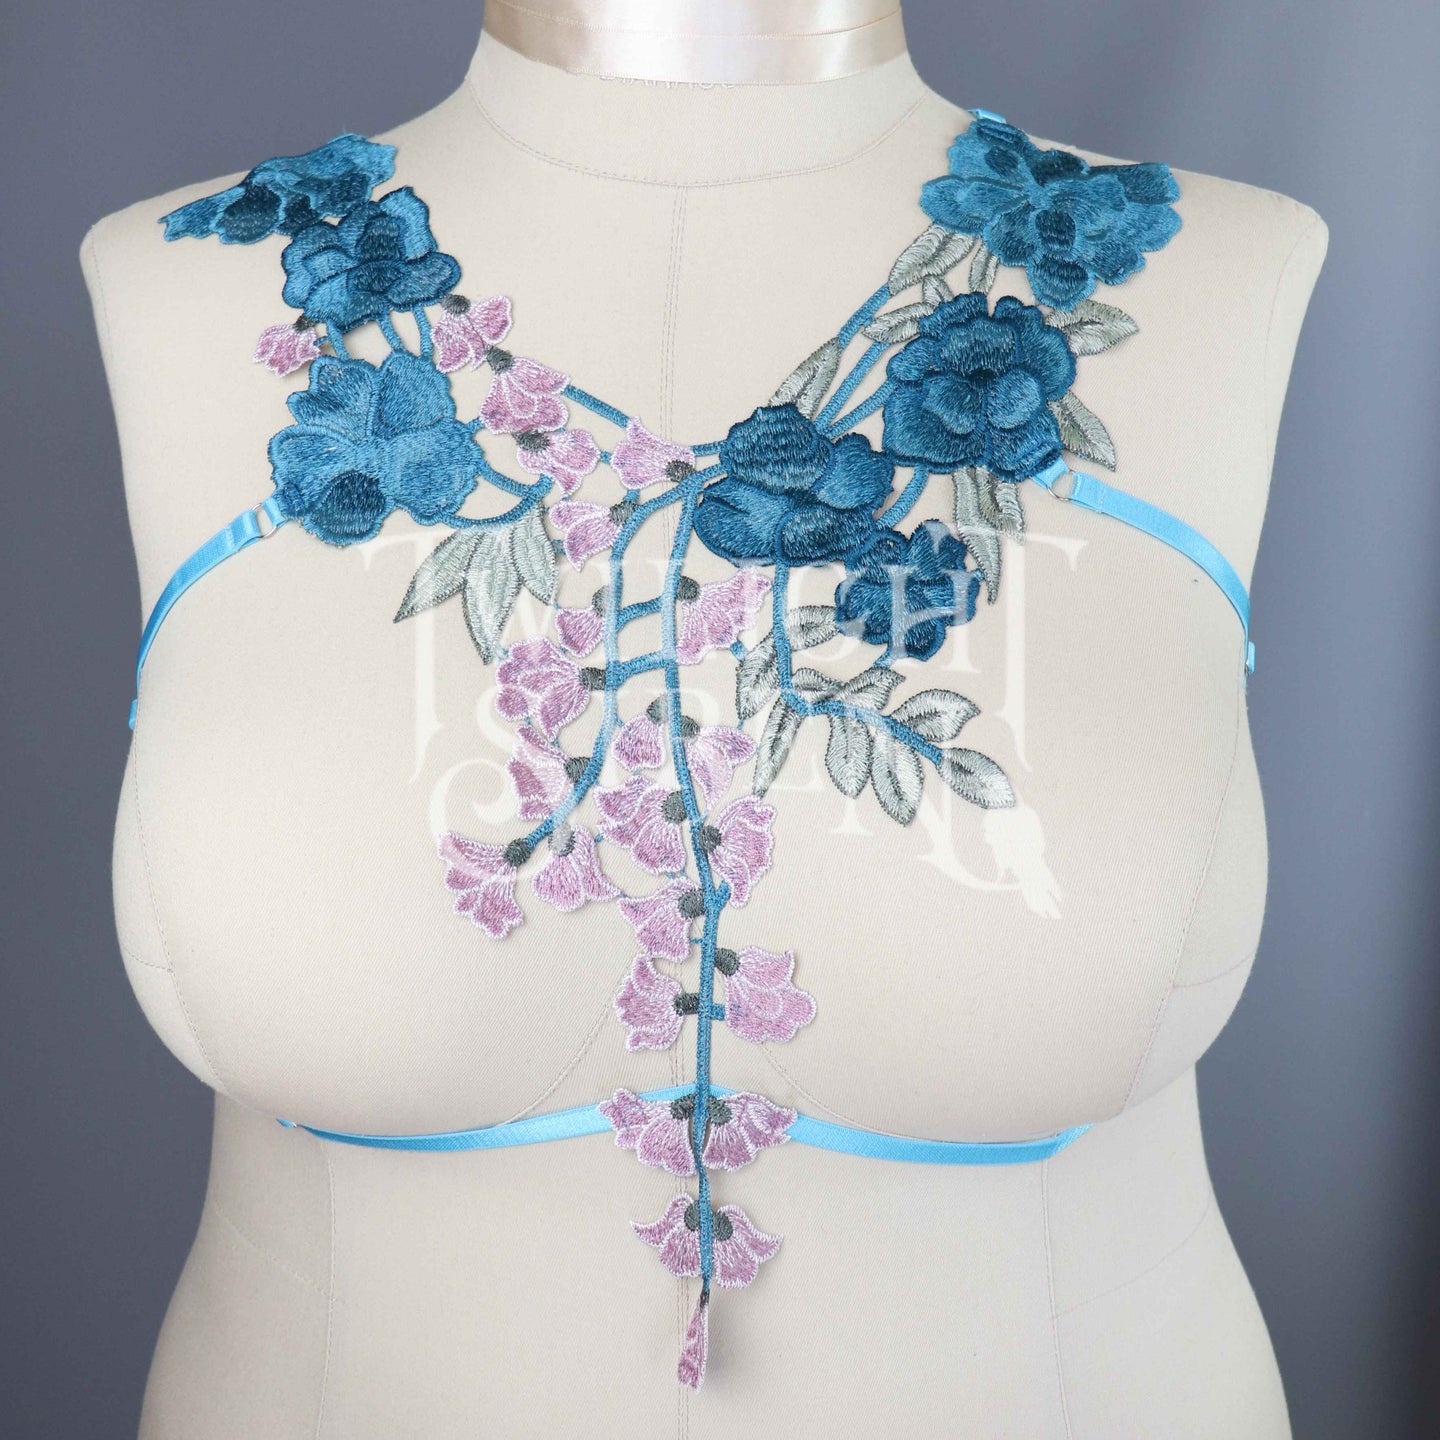 TEAL/ PEACOCK BLUE LACE BODY HARNESS BRALET ~ SIZE XXLARGE //  UK 24-26 / US 20-22